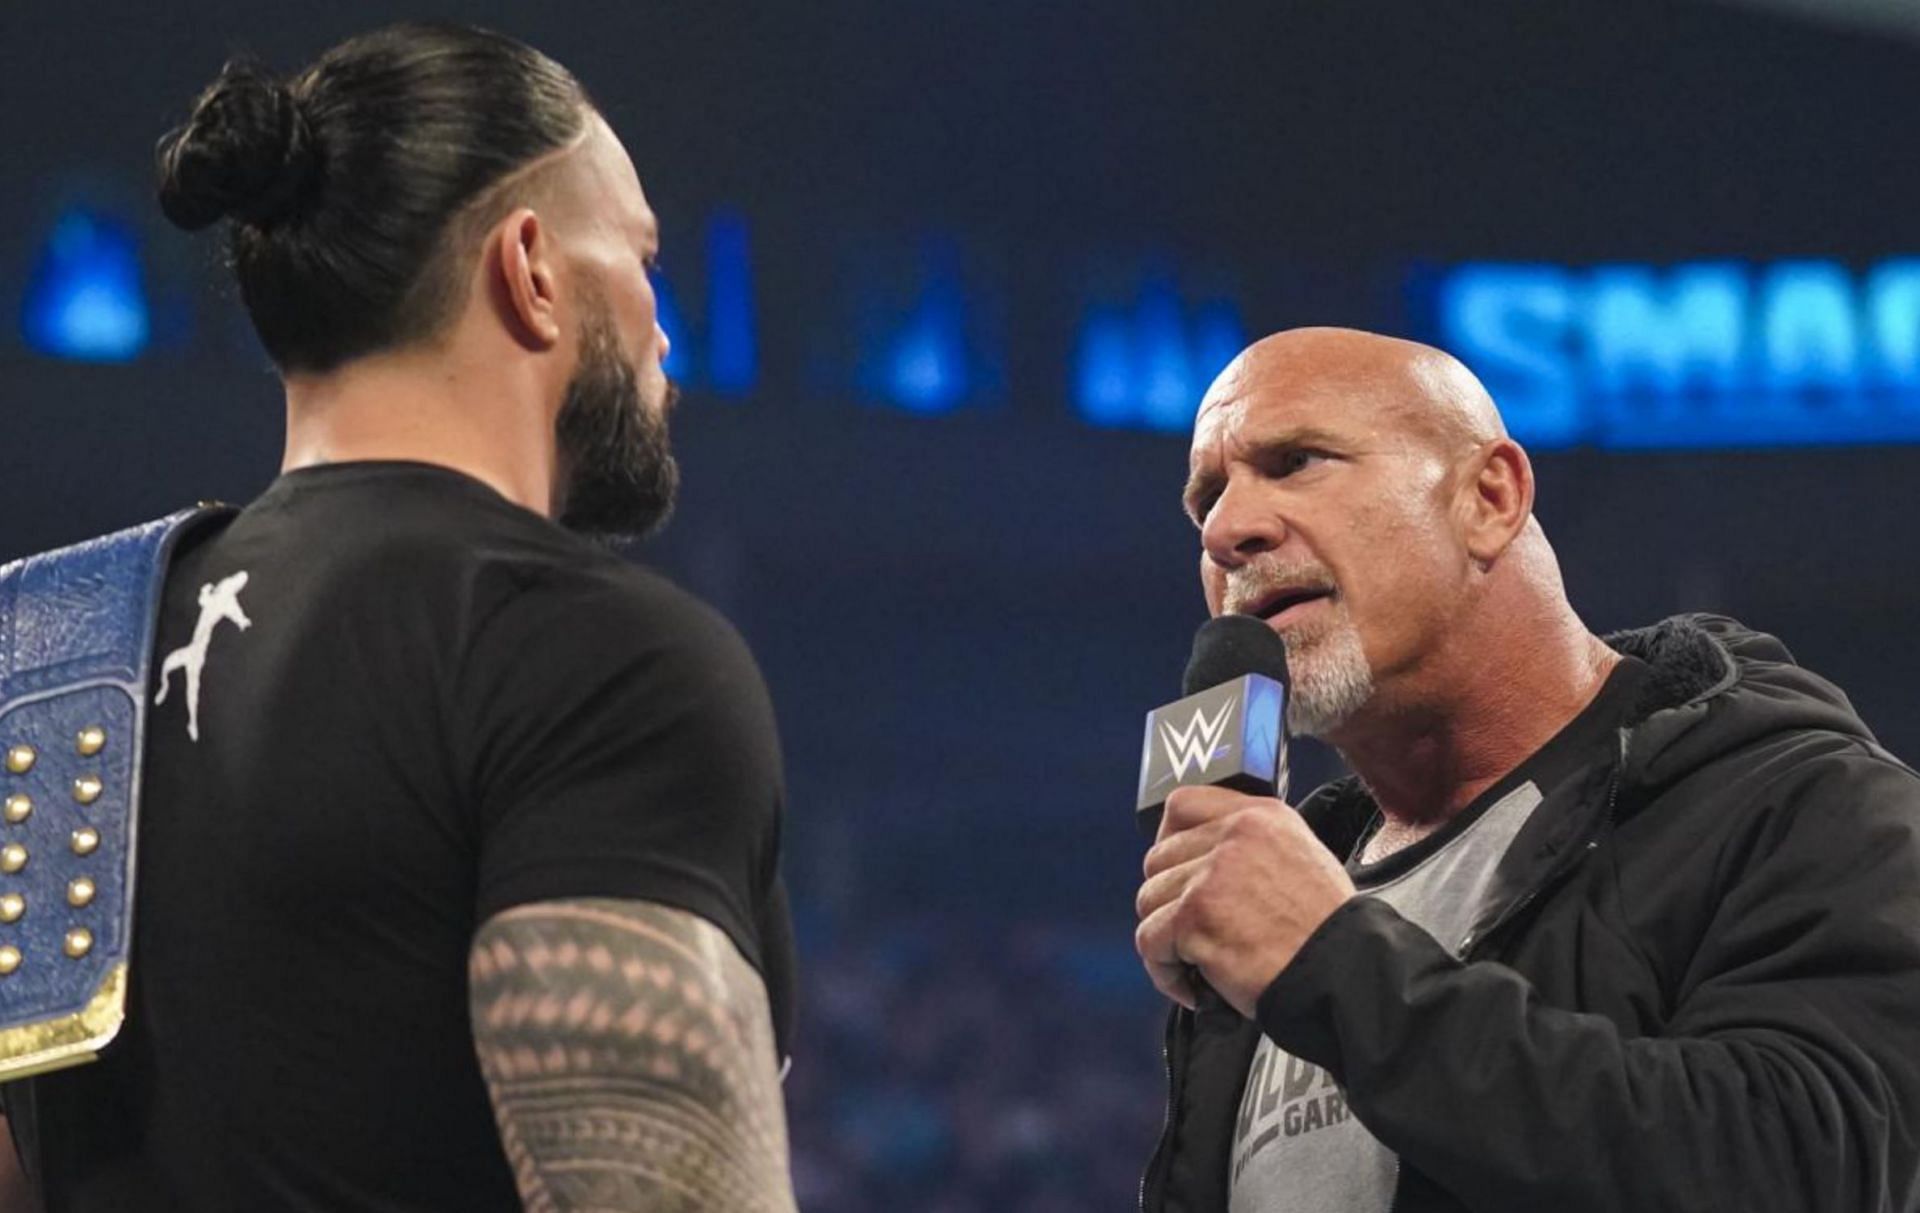 Goldberg and Reigns went face-to-face this past week on SmackDown